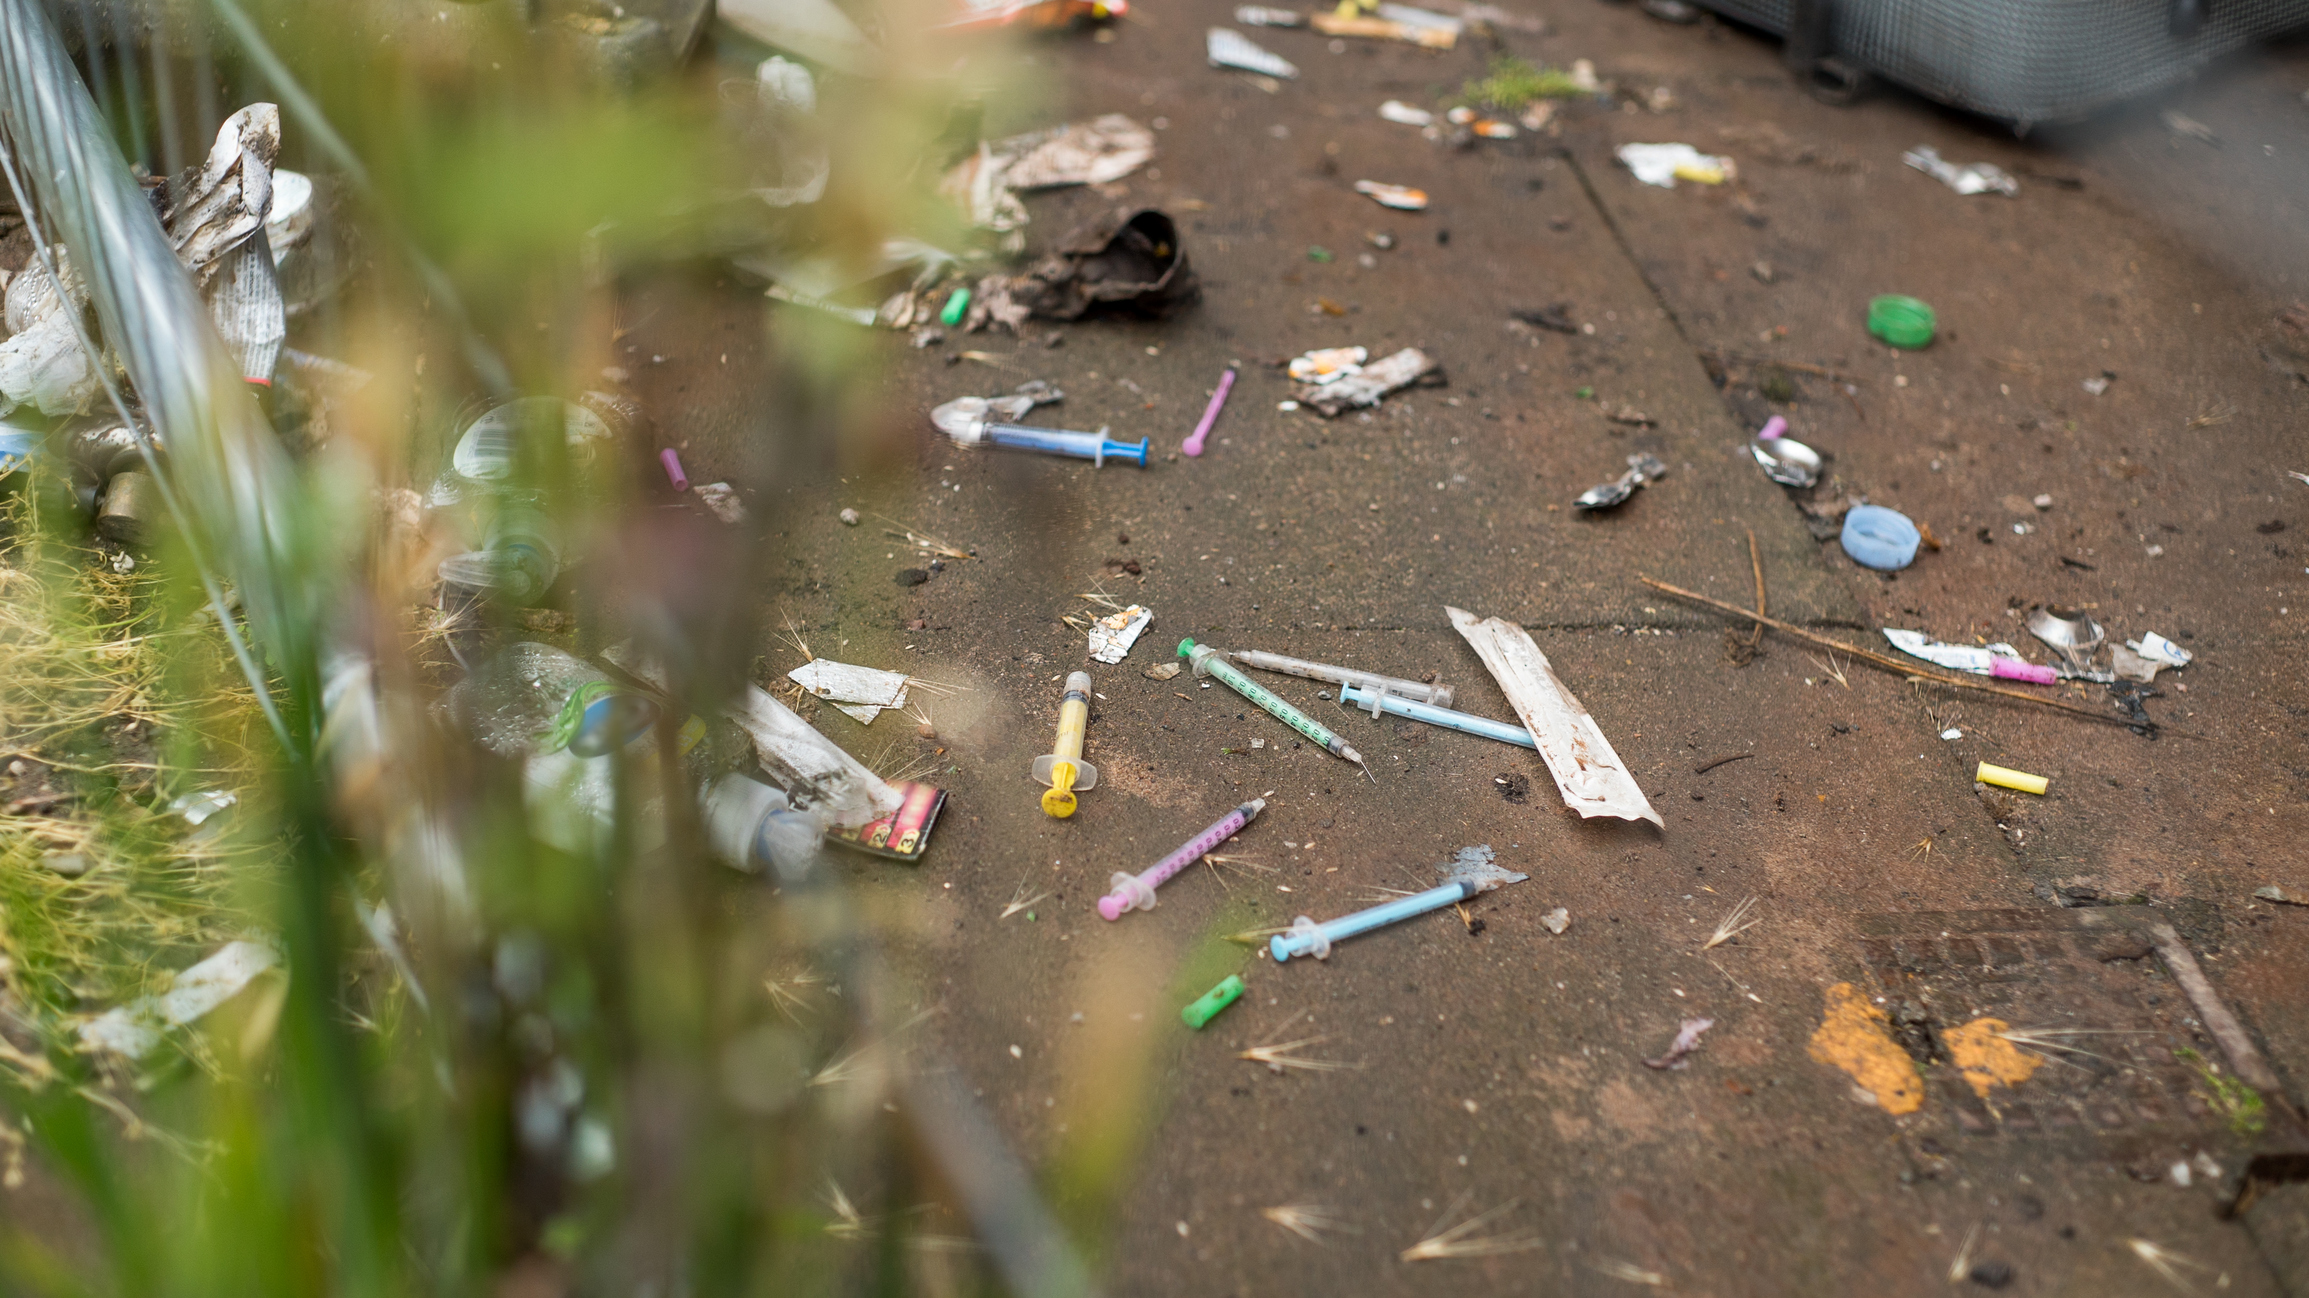 Syringes scattered on a litter strewn pavement. (Getty Images)